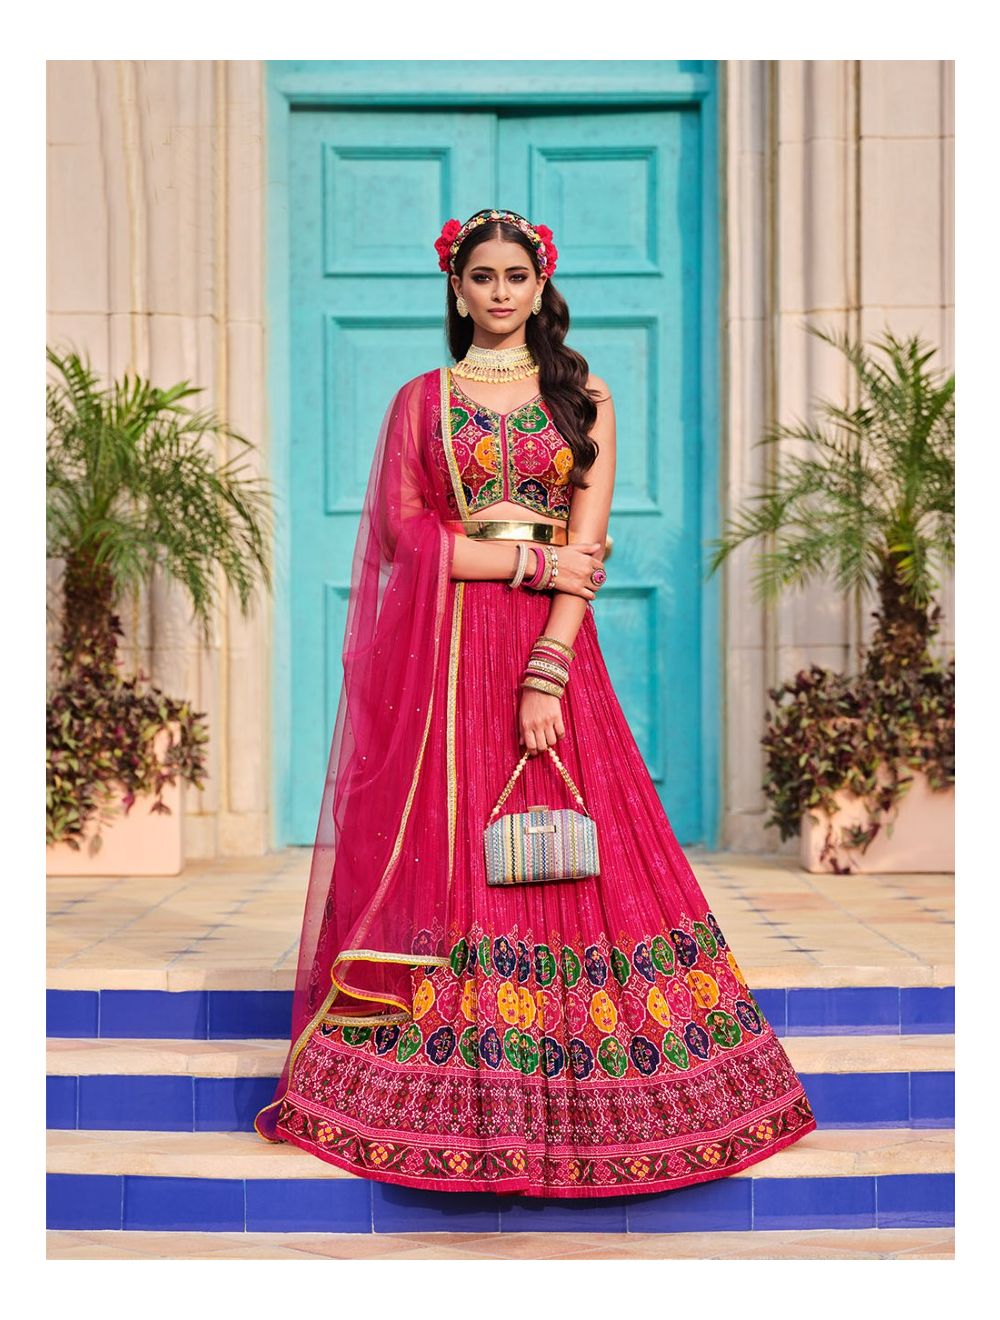 What is the best lipstick for a green lehenga? - Quora